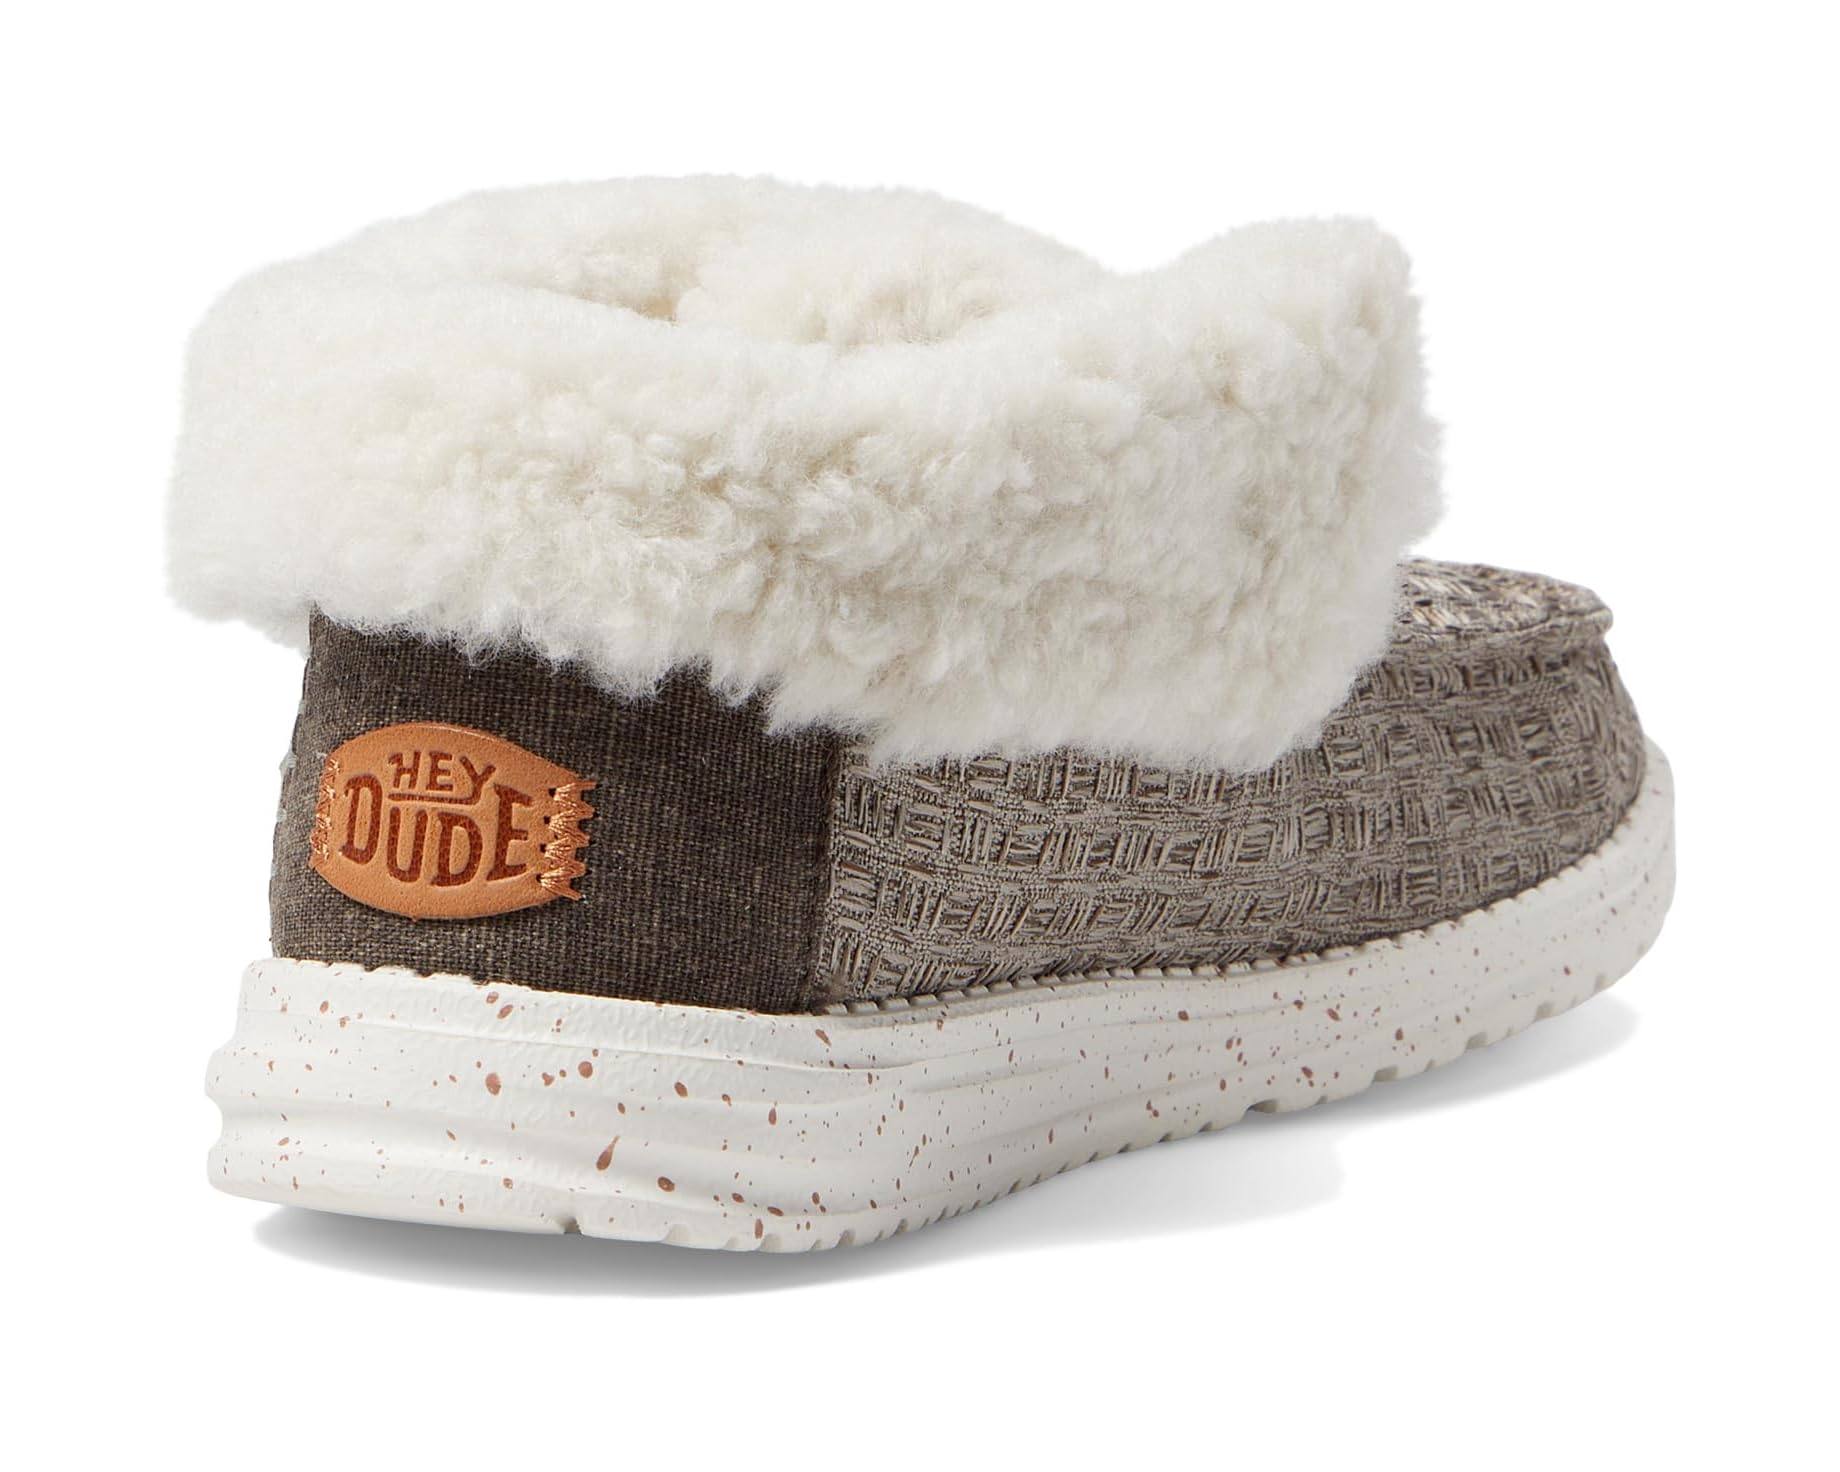 Wendy Fold Stitch Cozy - The Shoe CollectiveHey Dude